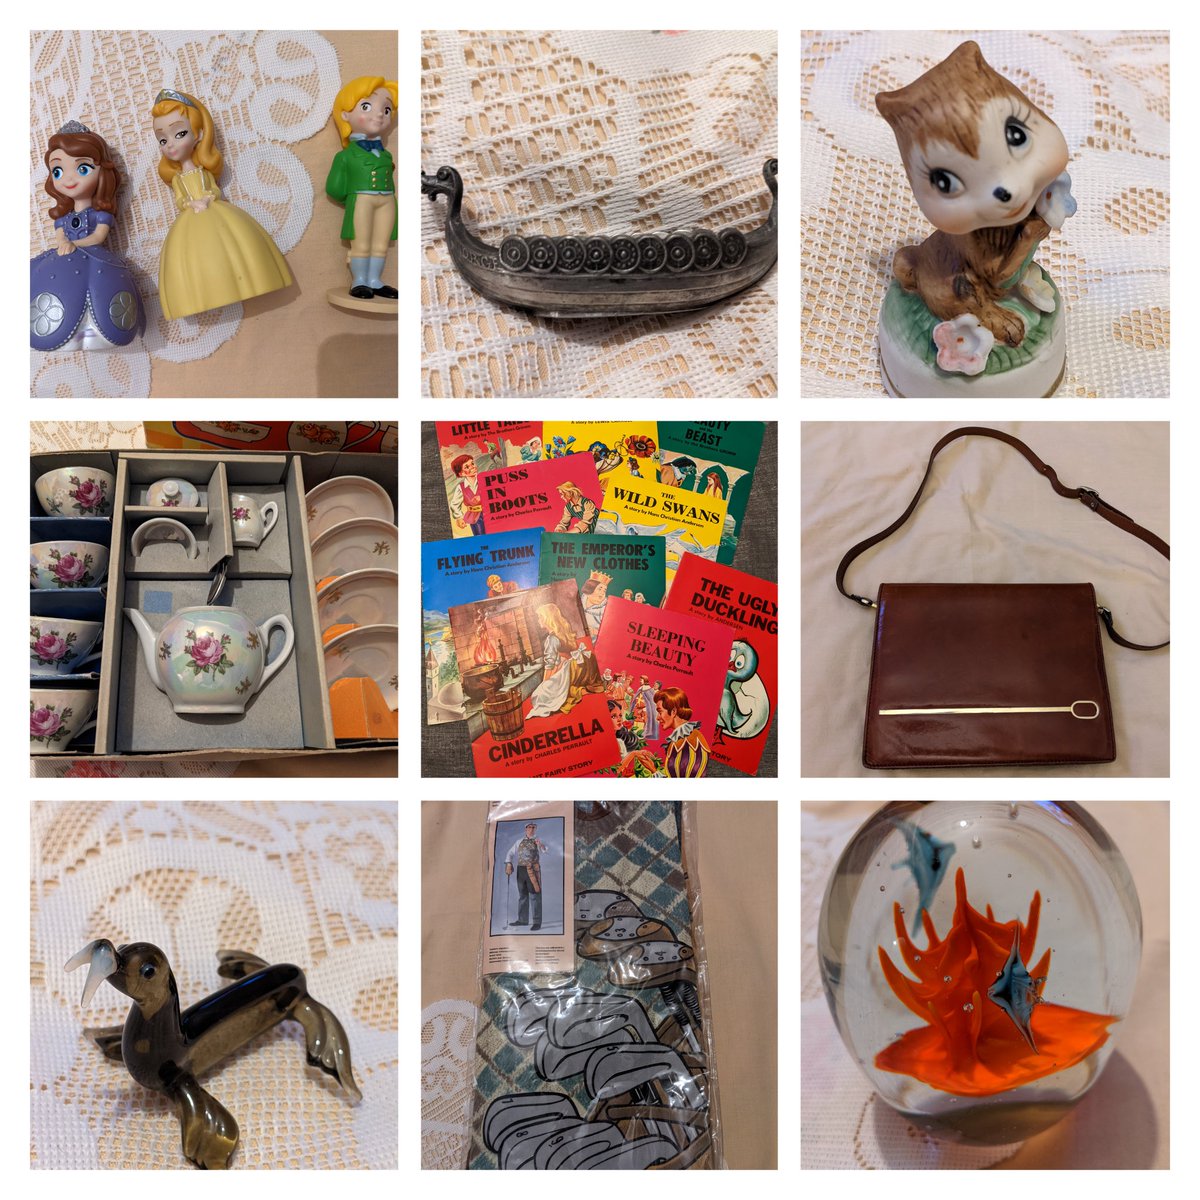 Stocky stock reshuffle

eBay bargains to be had 

Link in bio

#bargains #stockclearing #kitsch #retro #vintage #books #glass #golf #paperweight #princesssofia #italianleather #vikingboat #goodies #teaset #ceramic #childrenstoys #secondhand